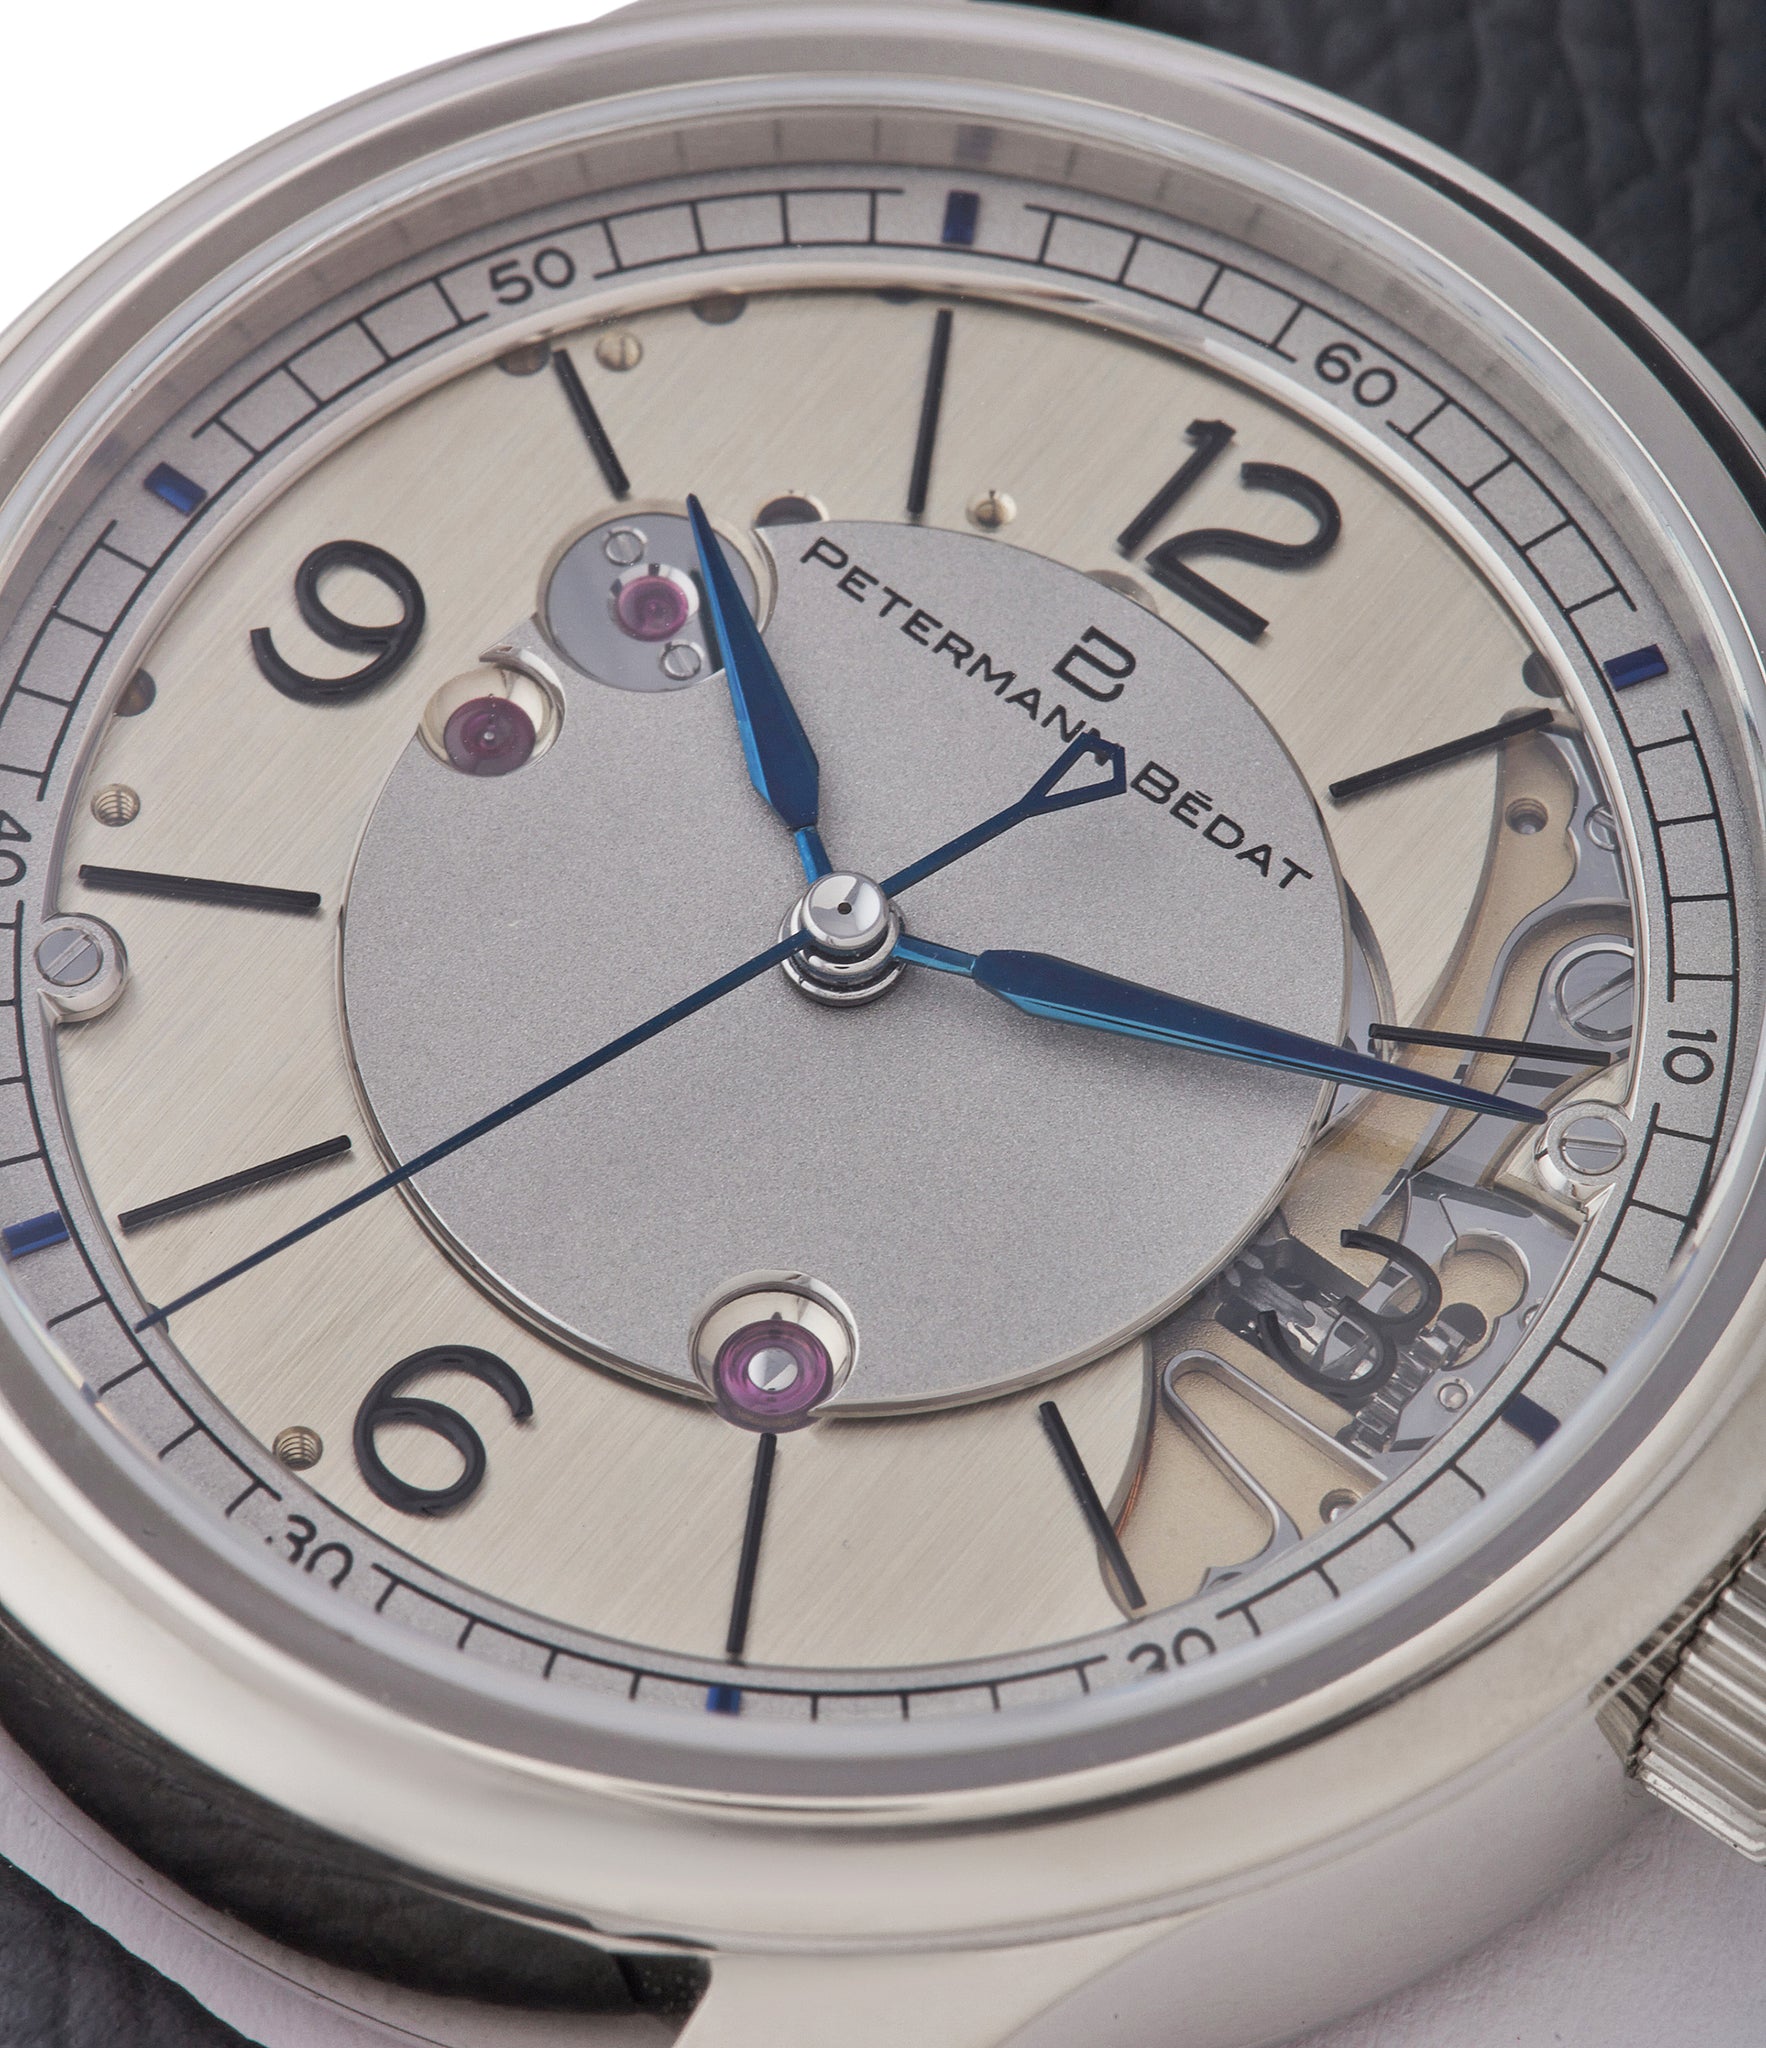 Deadbeat seconds Petermann Bédat 1967 Deadbeat Seconds white gold time-only watch independent watchmakers order official retailer A Collected Man London